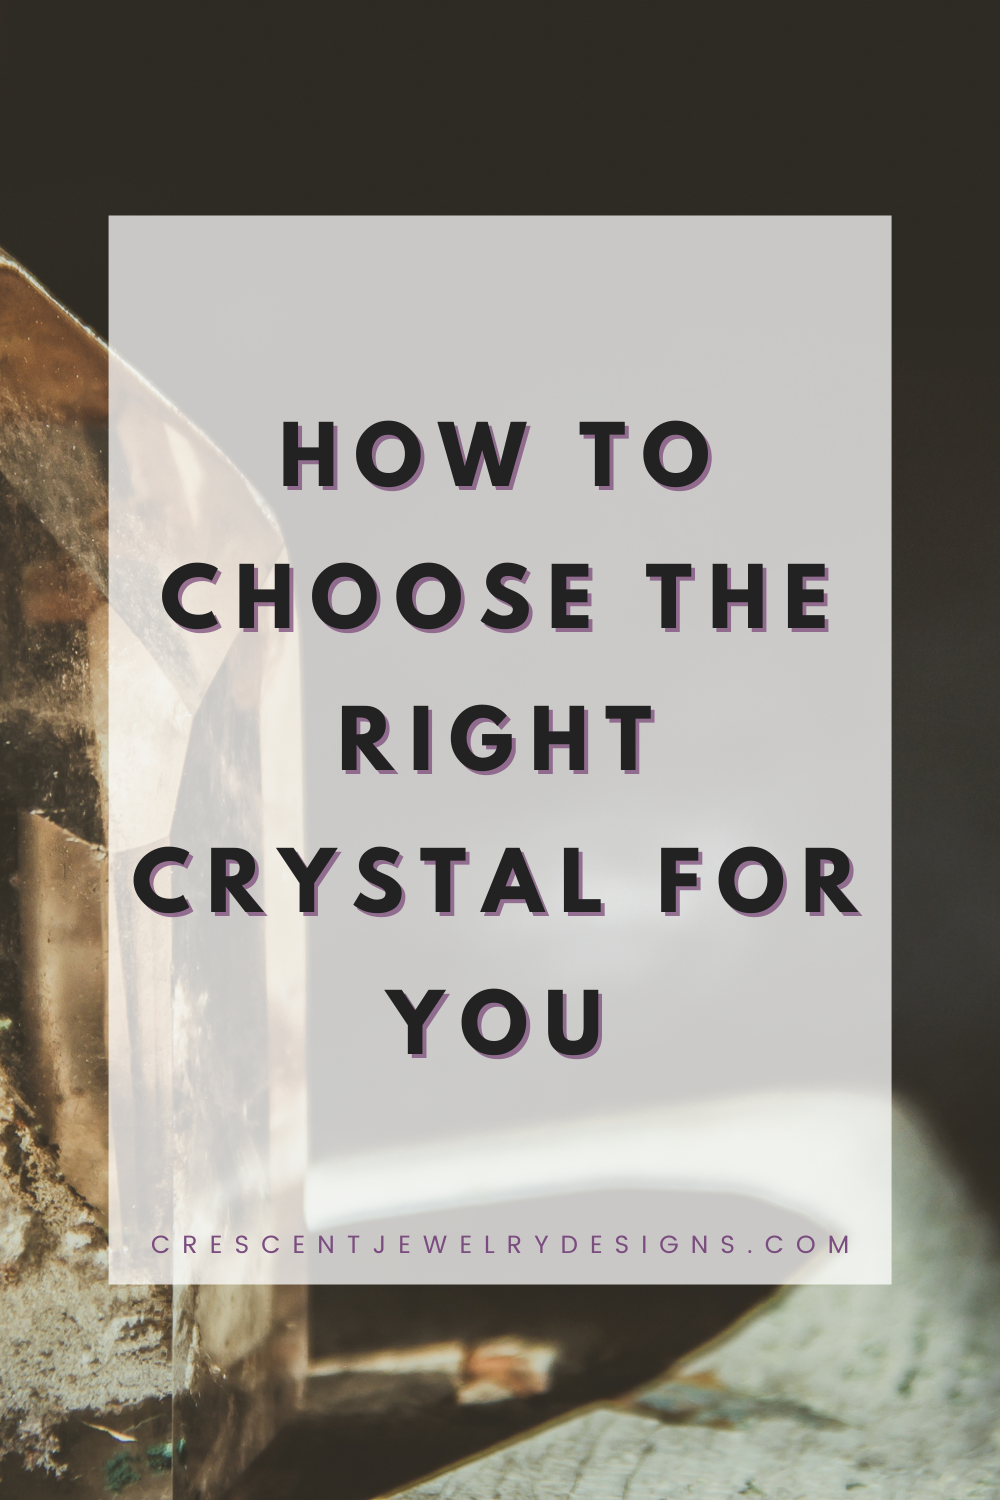 How to choose the right crystal for you